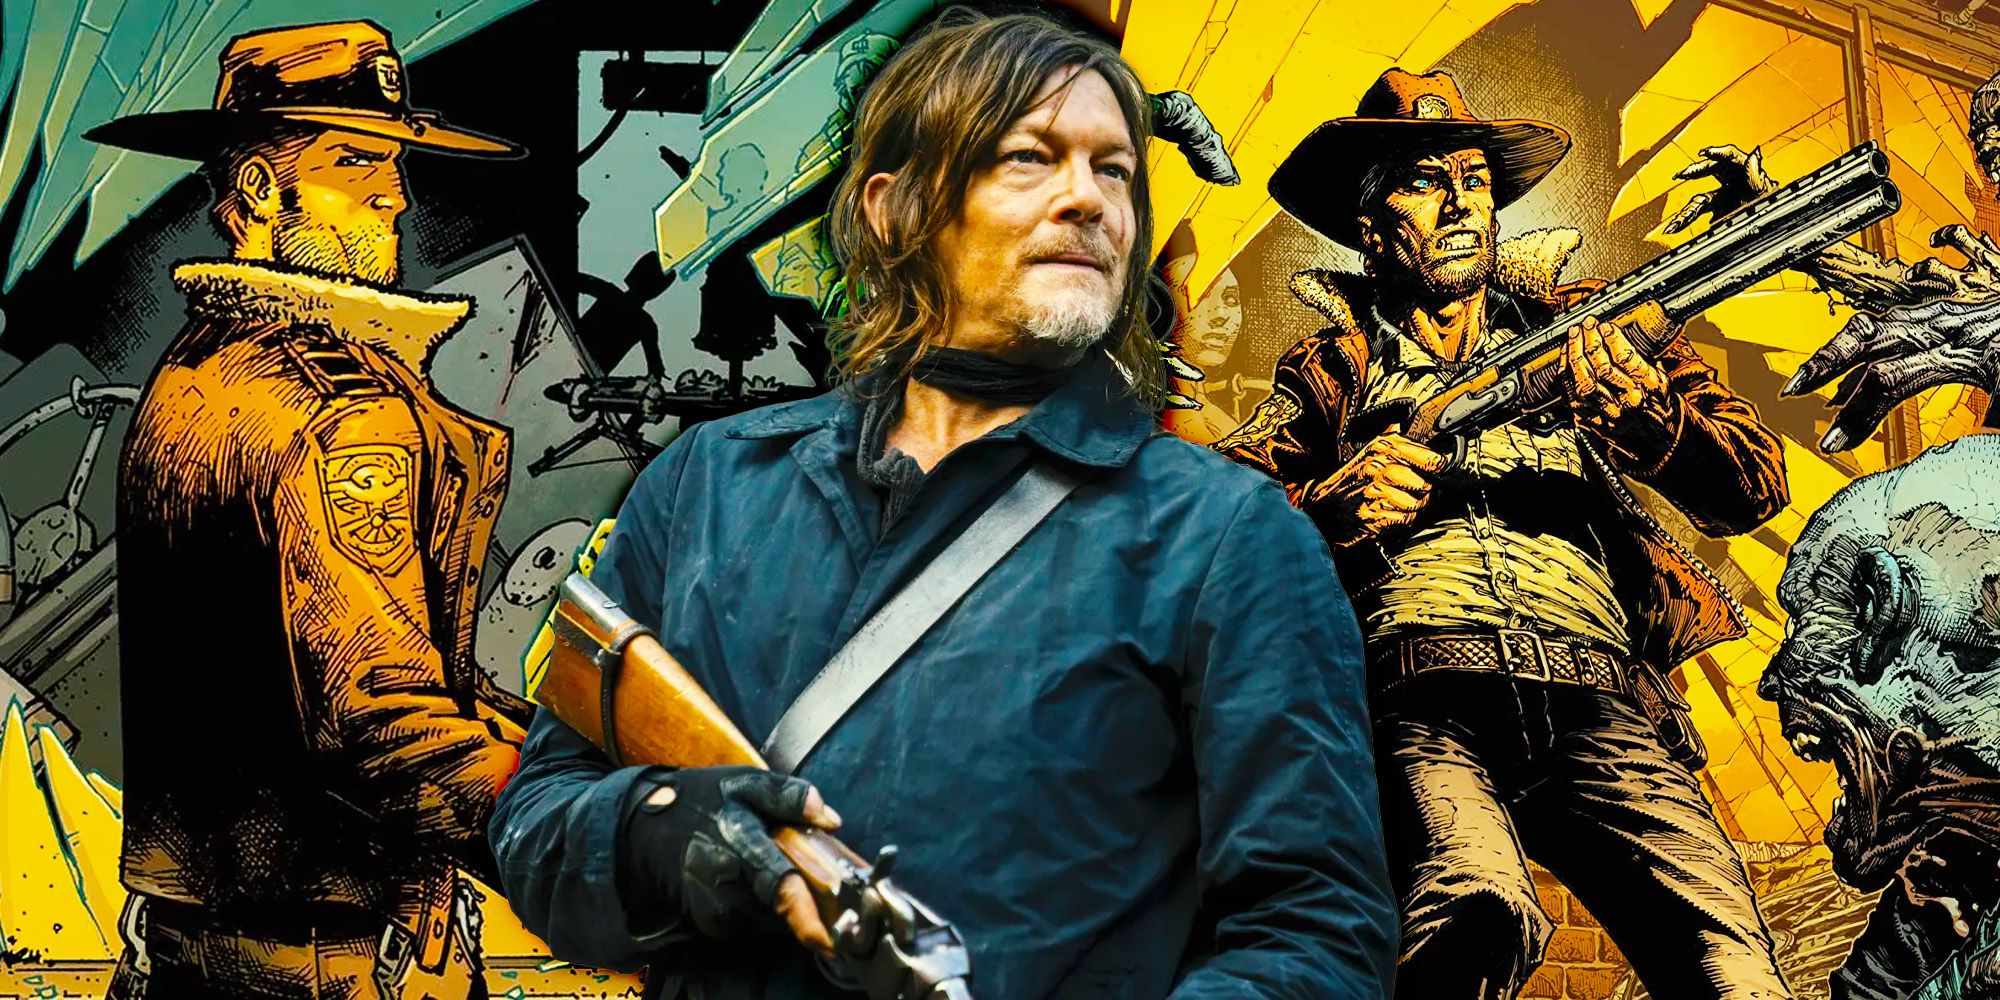 Custom image of Daryl Dixon from AMC's Walking Dead with comic book images of Rick Grimes around him